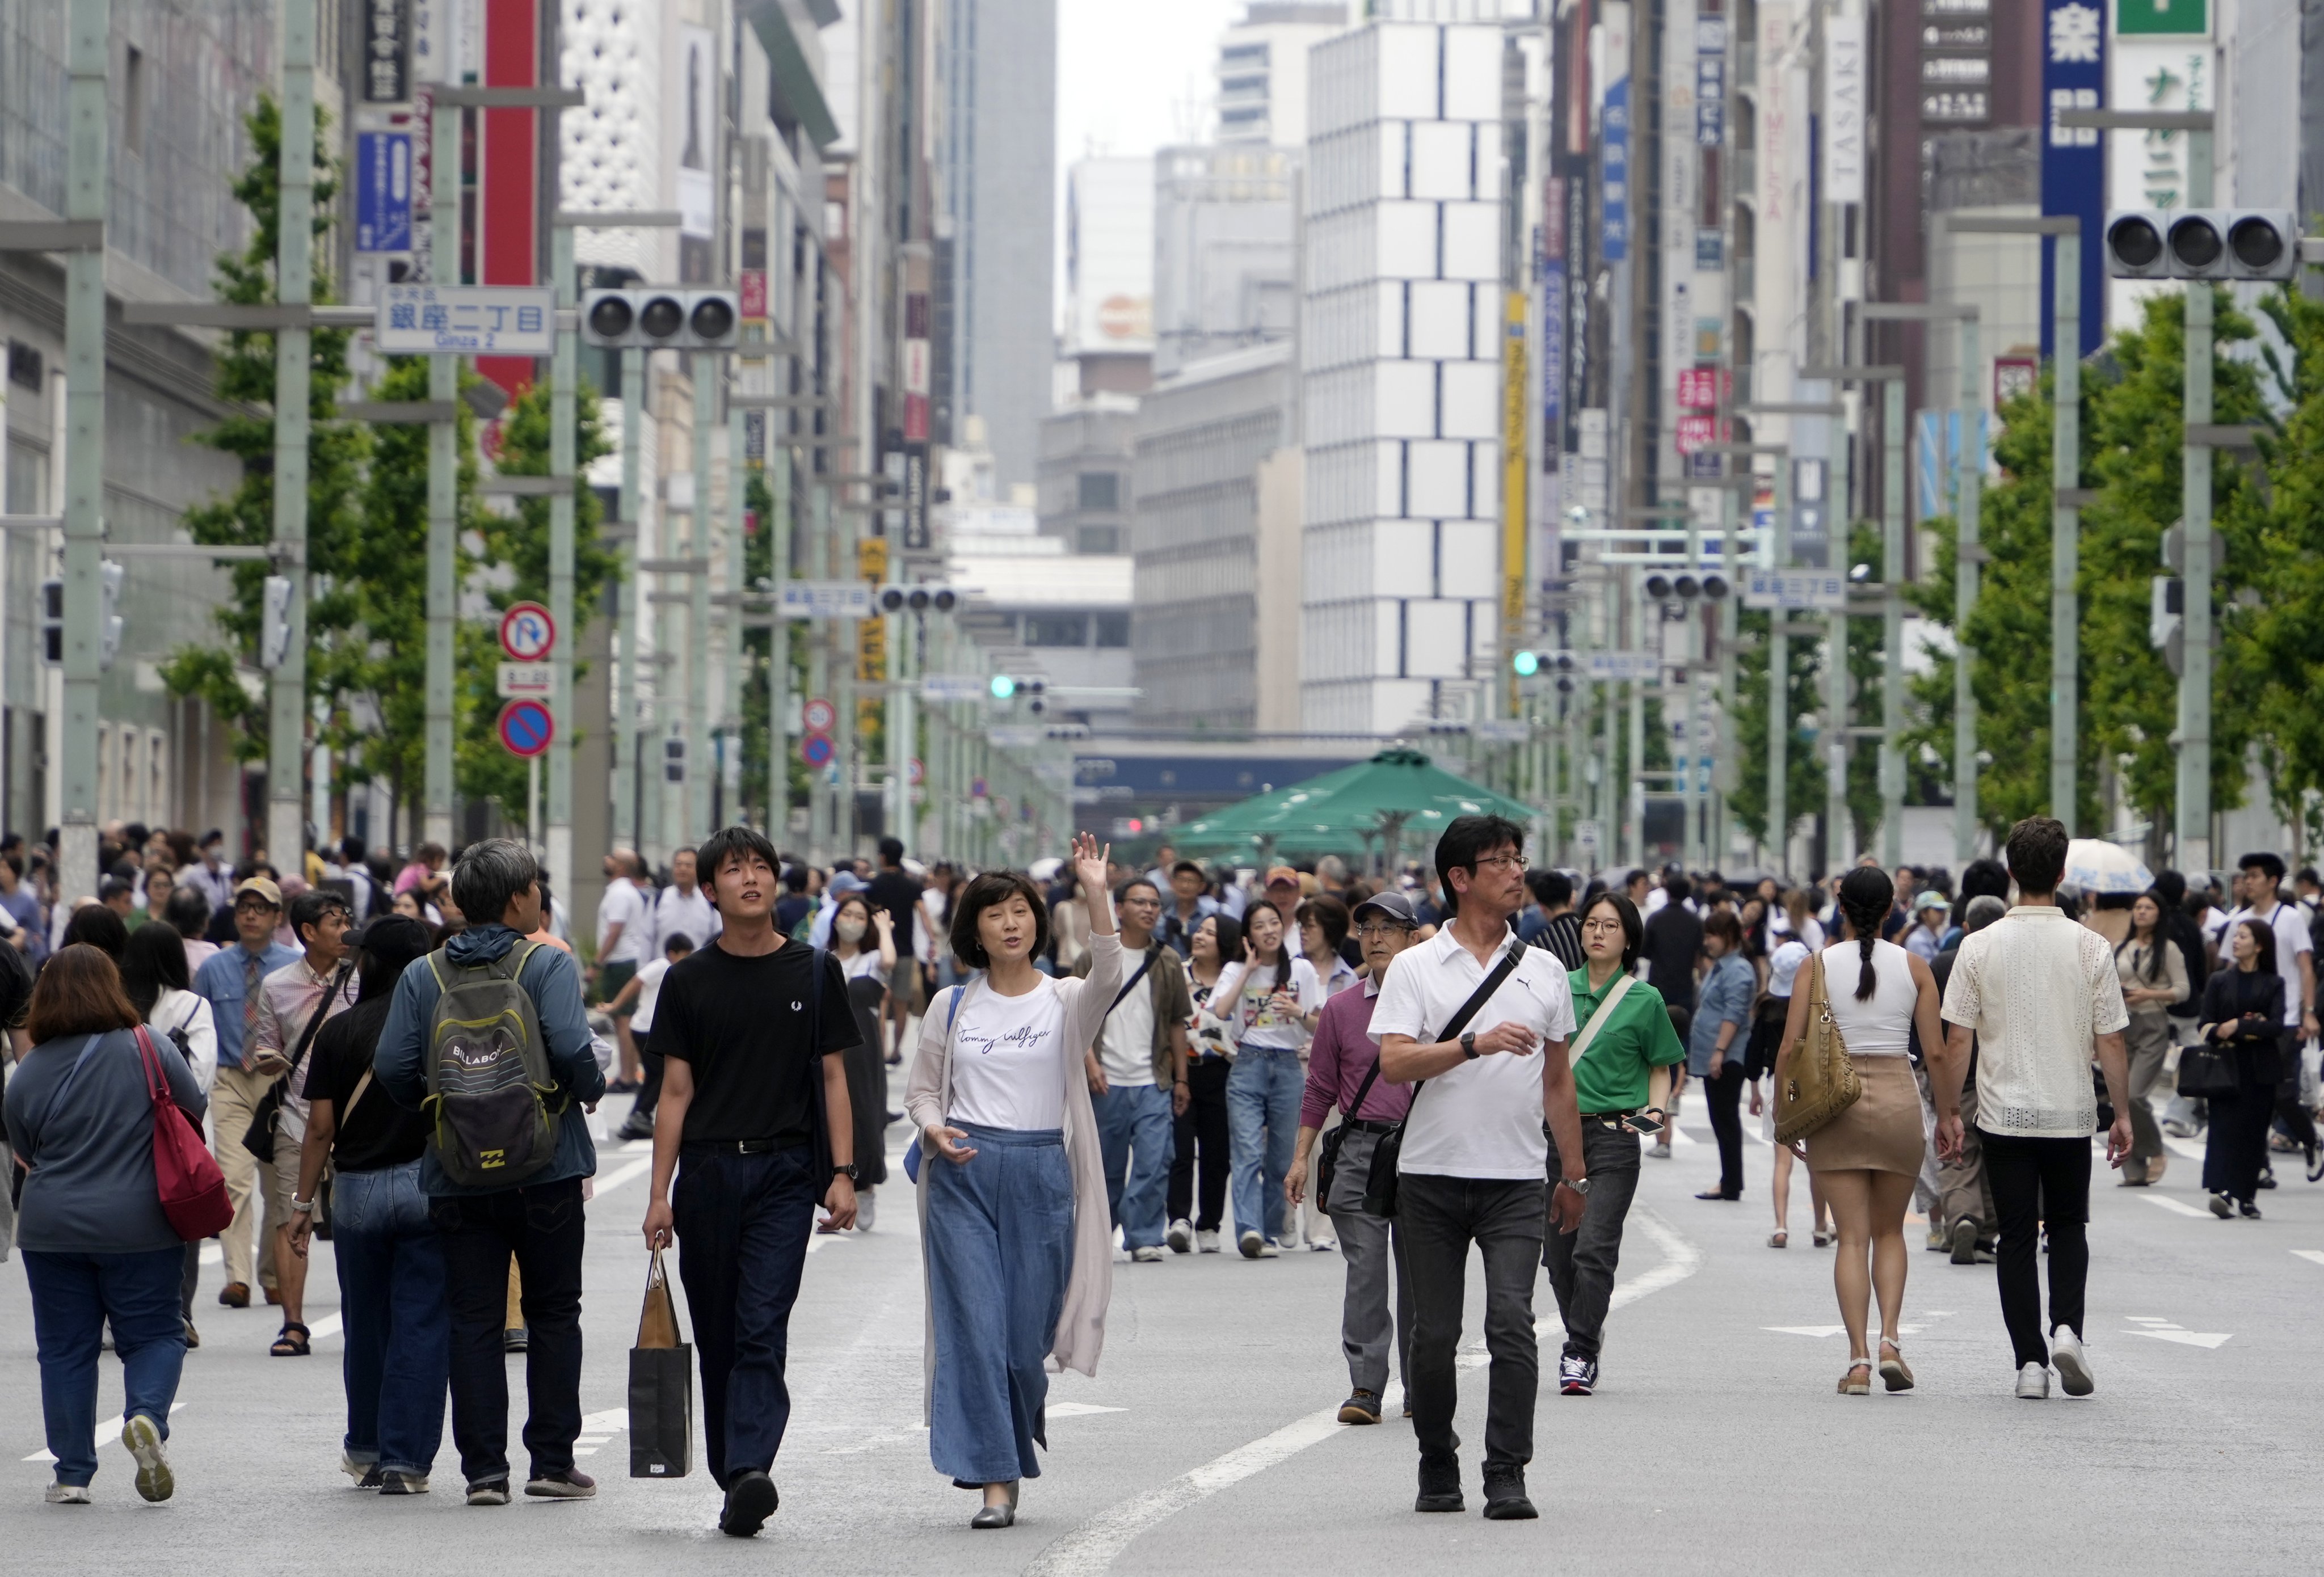 Shoppers walk through the main street of Ginza, Tokyo’s luxury shopping district. Japan’s largely homogenous population does not make the country xenophobic, an analyst says. Photo: EPA-EFE